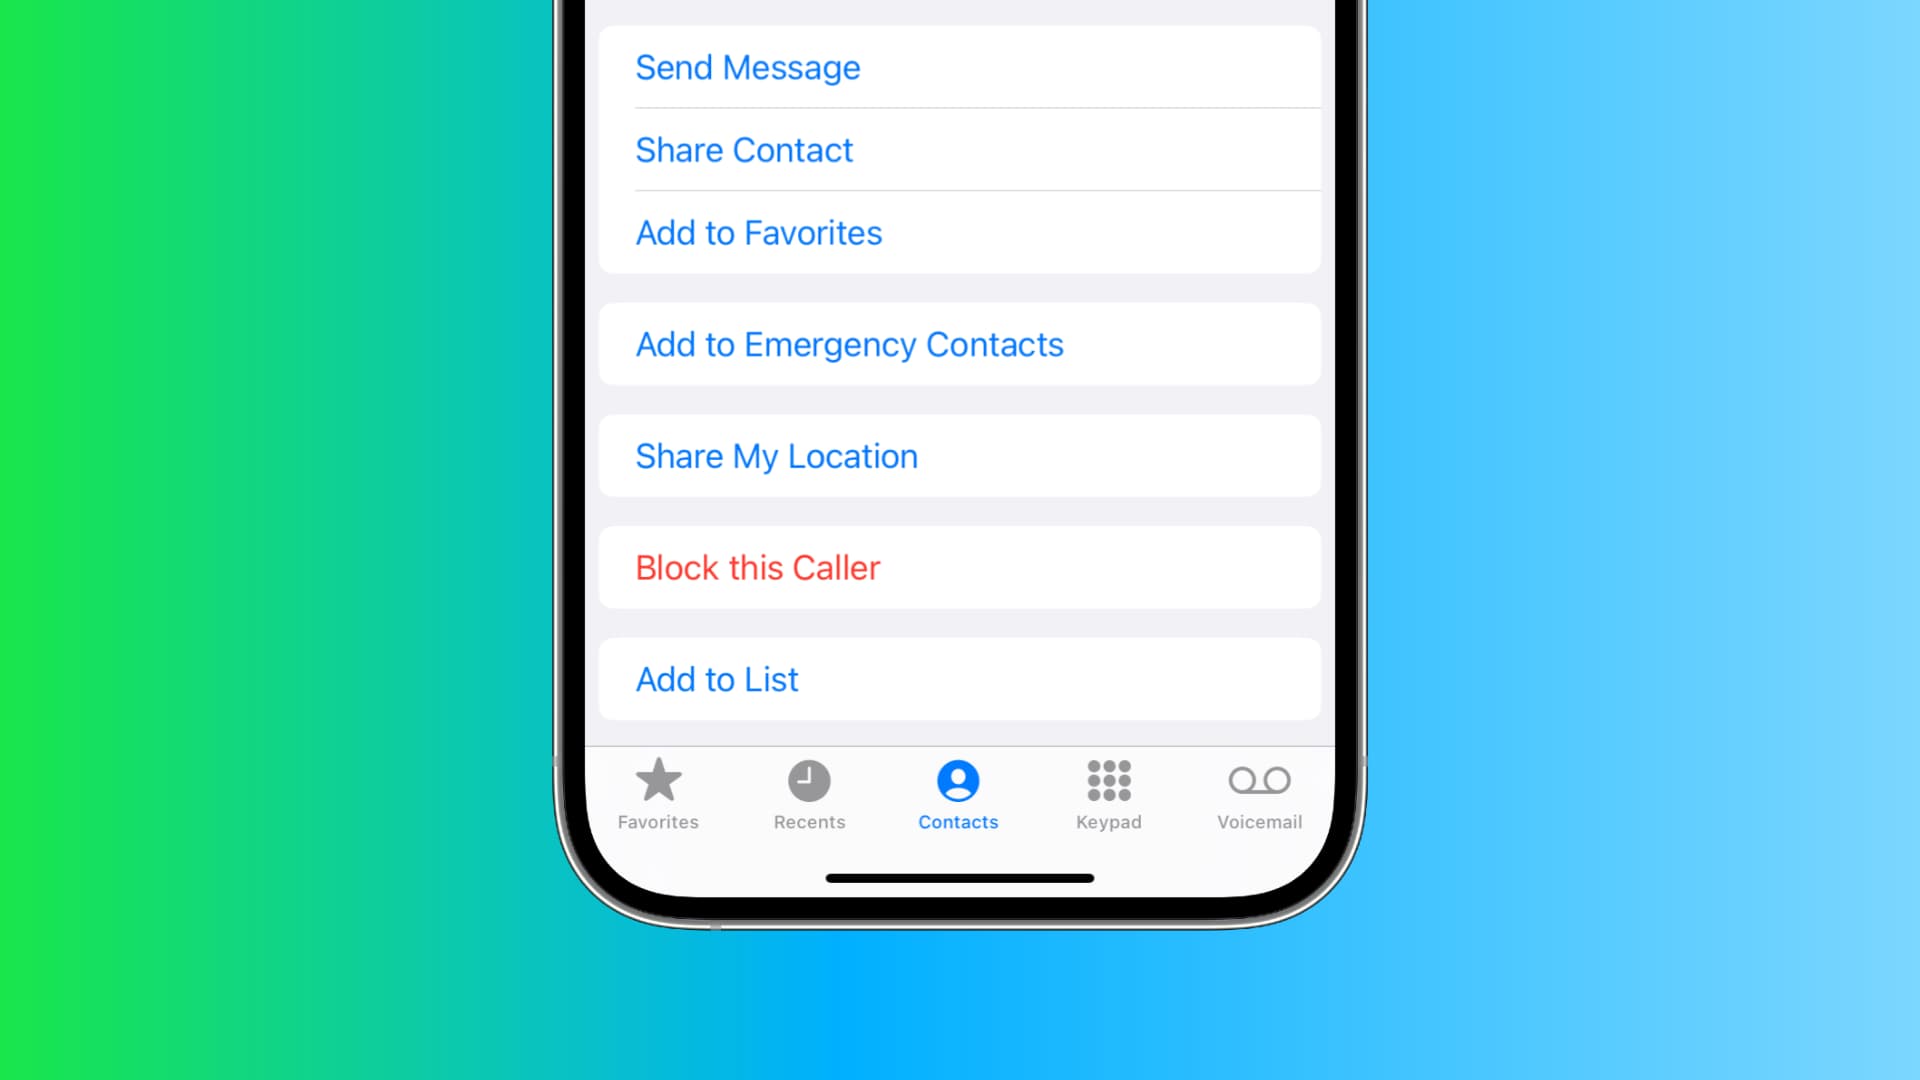 How to block or unblock a caller or message sender on iPhone